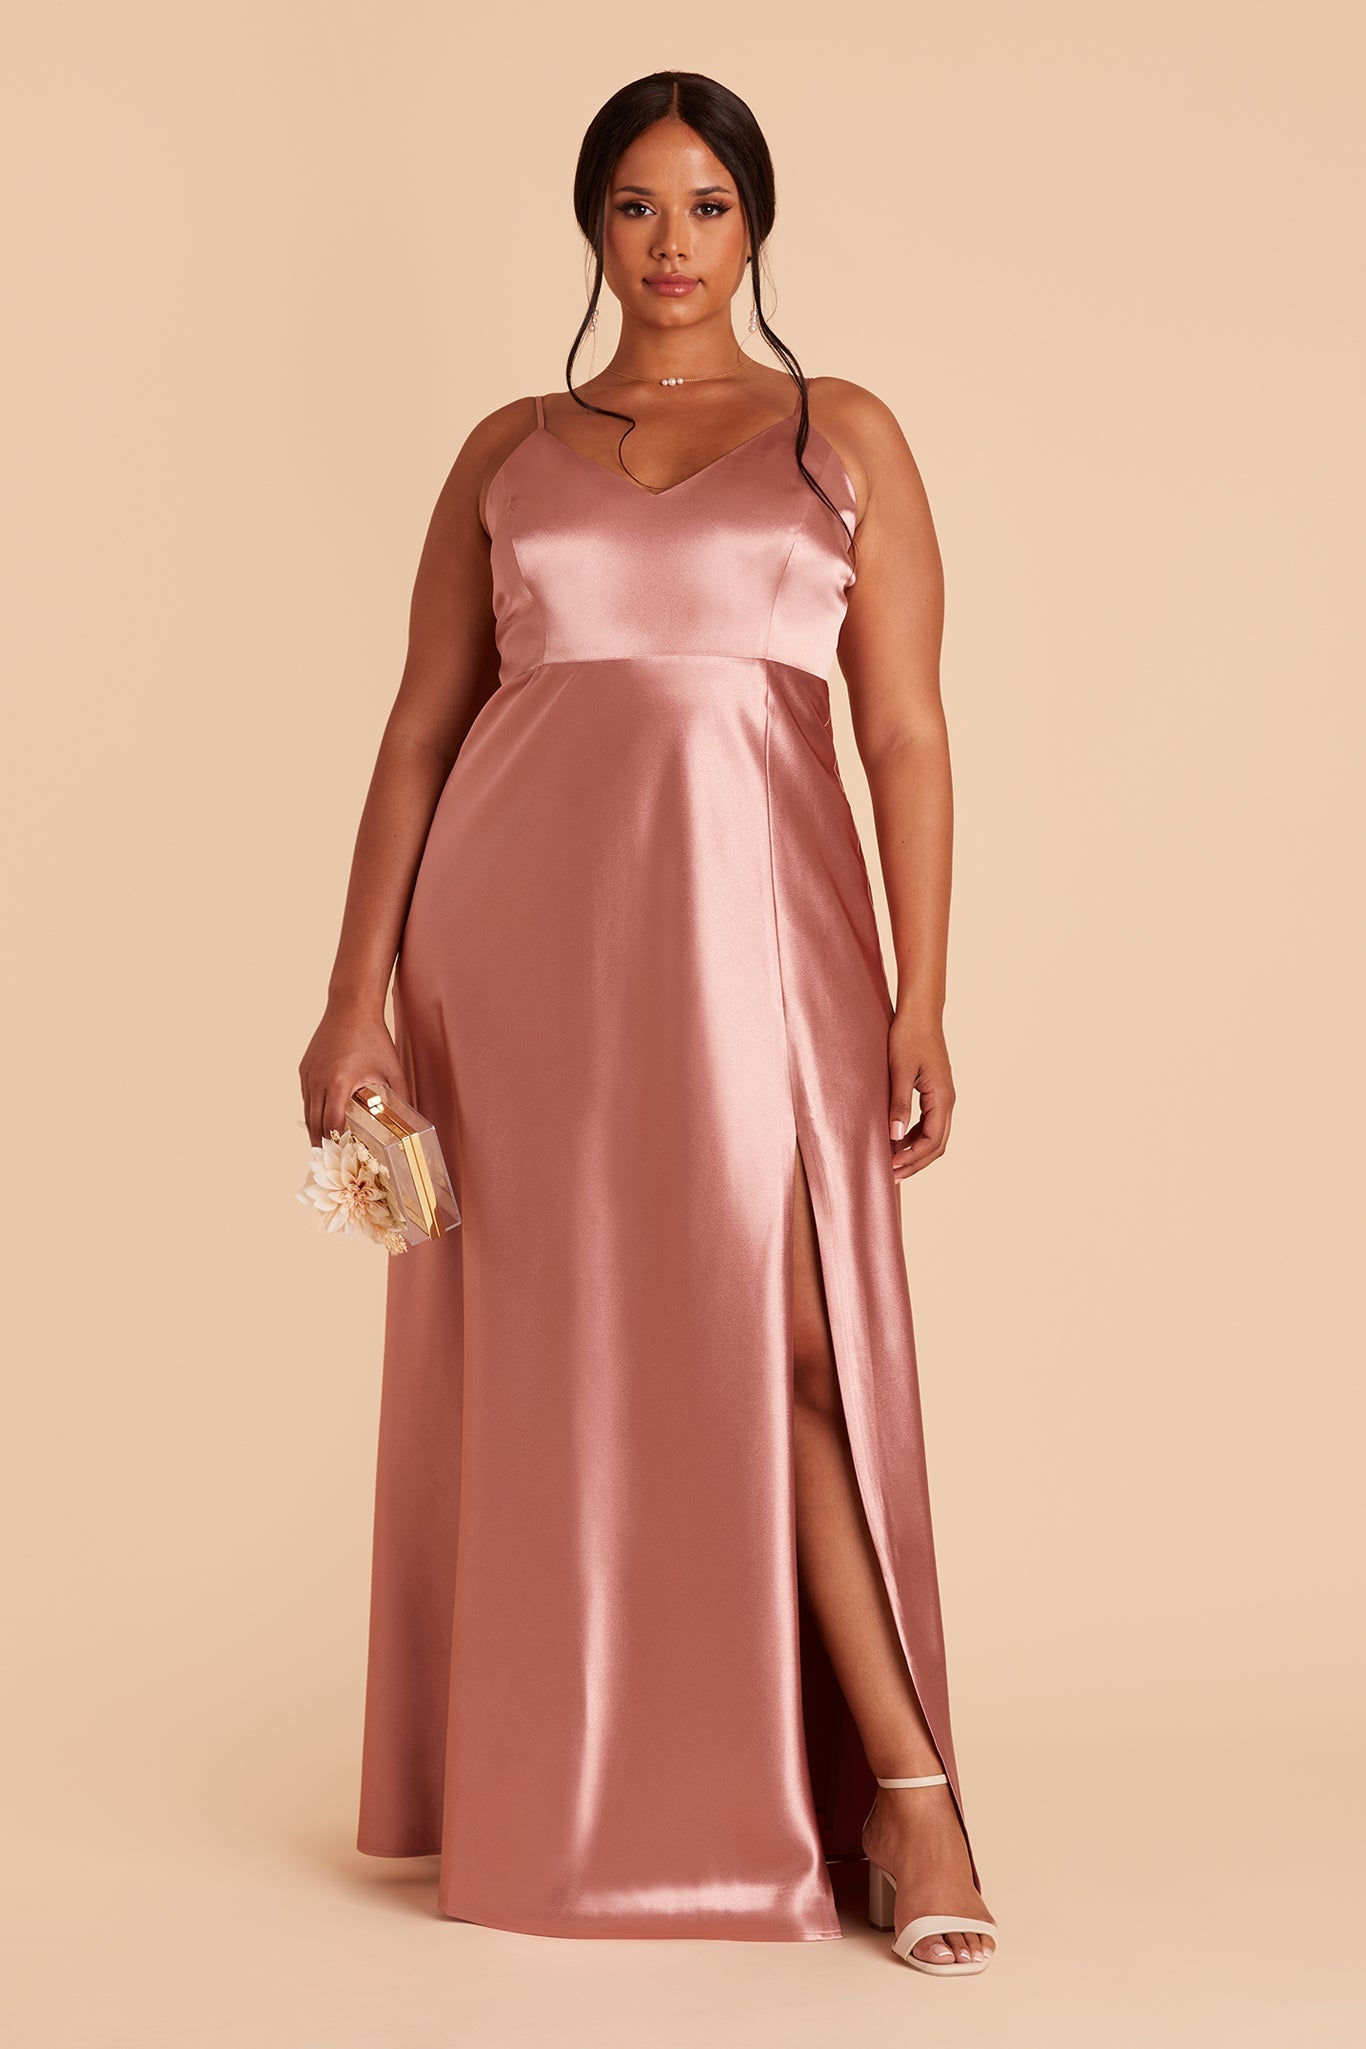 Jay plus size bridesmaid dress with slit in desert rose satin by Birdy Grey, front view